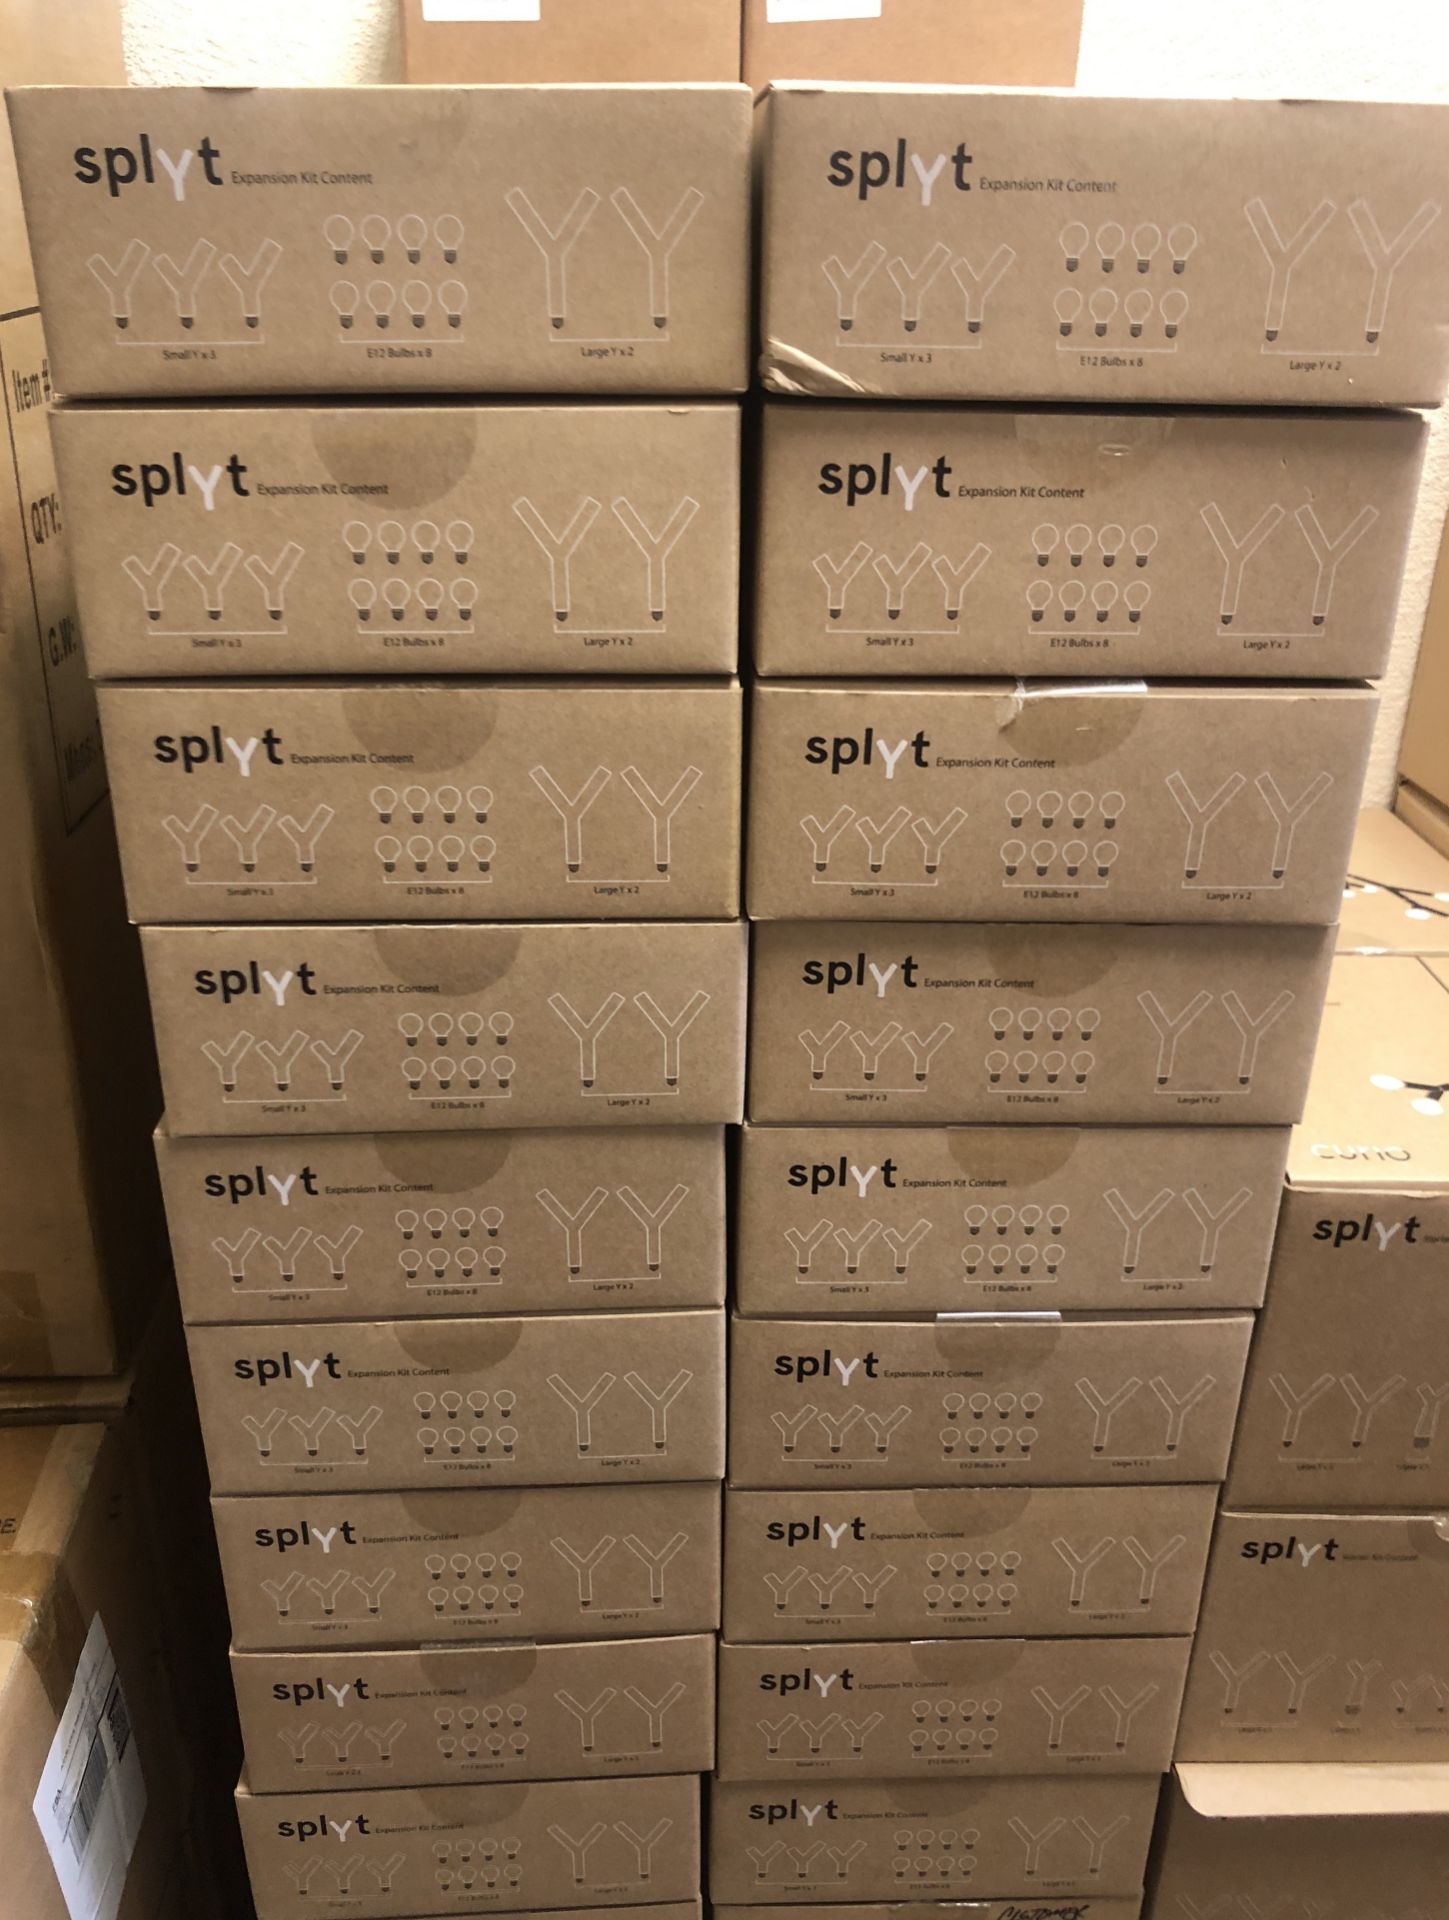 140 BOXES OF SPLYT DECORATIVE LIGHTING SYSTEMS $20,000 RETAIL VALUE PACKAGE - Image 5 of 6